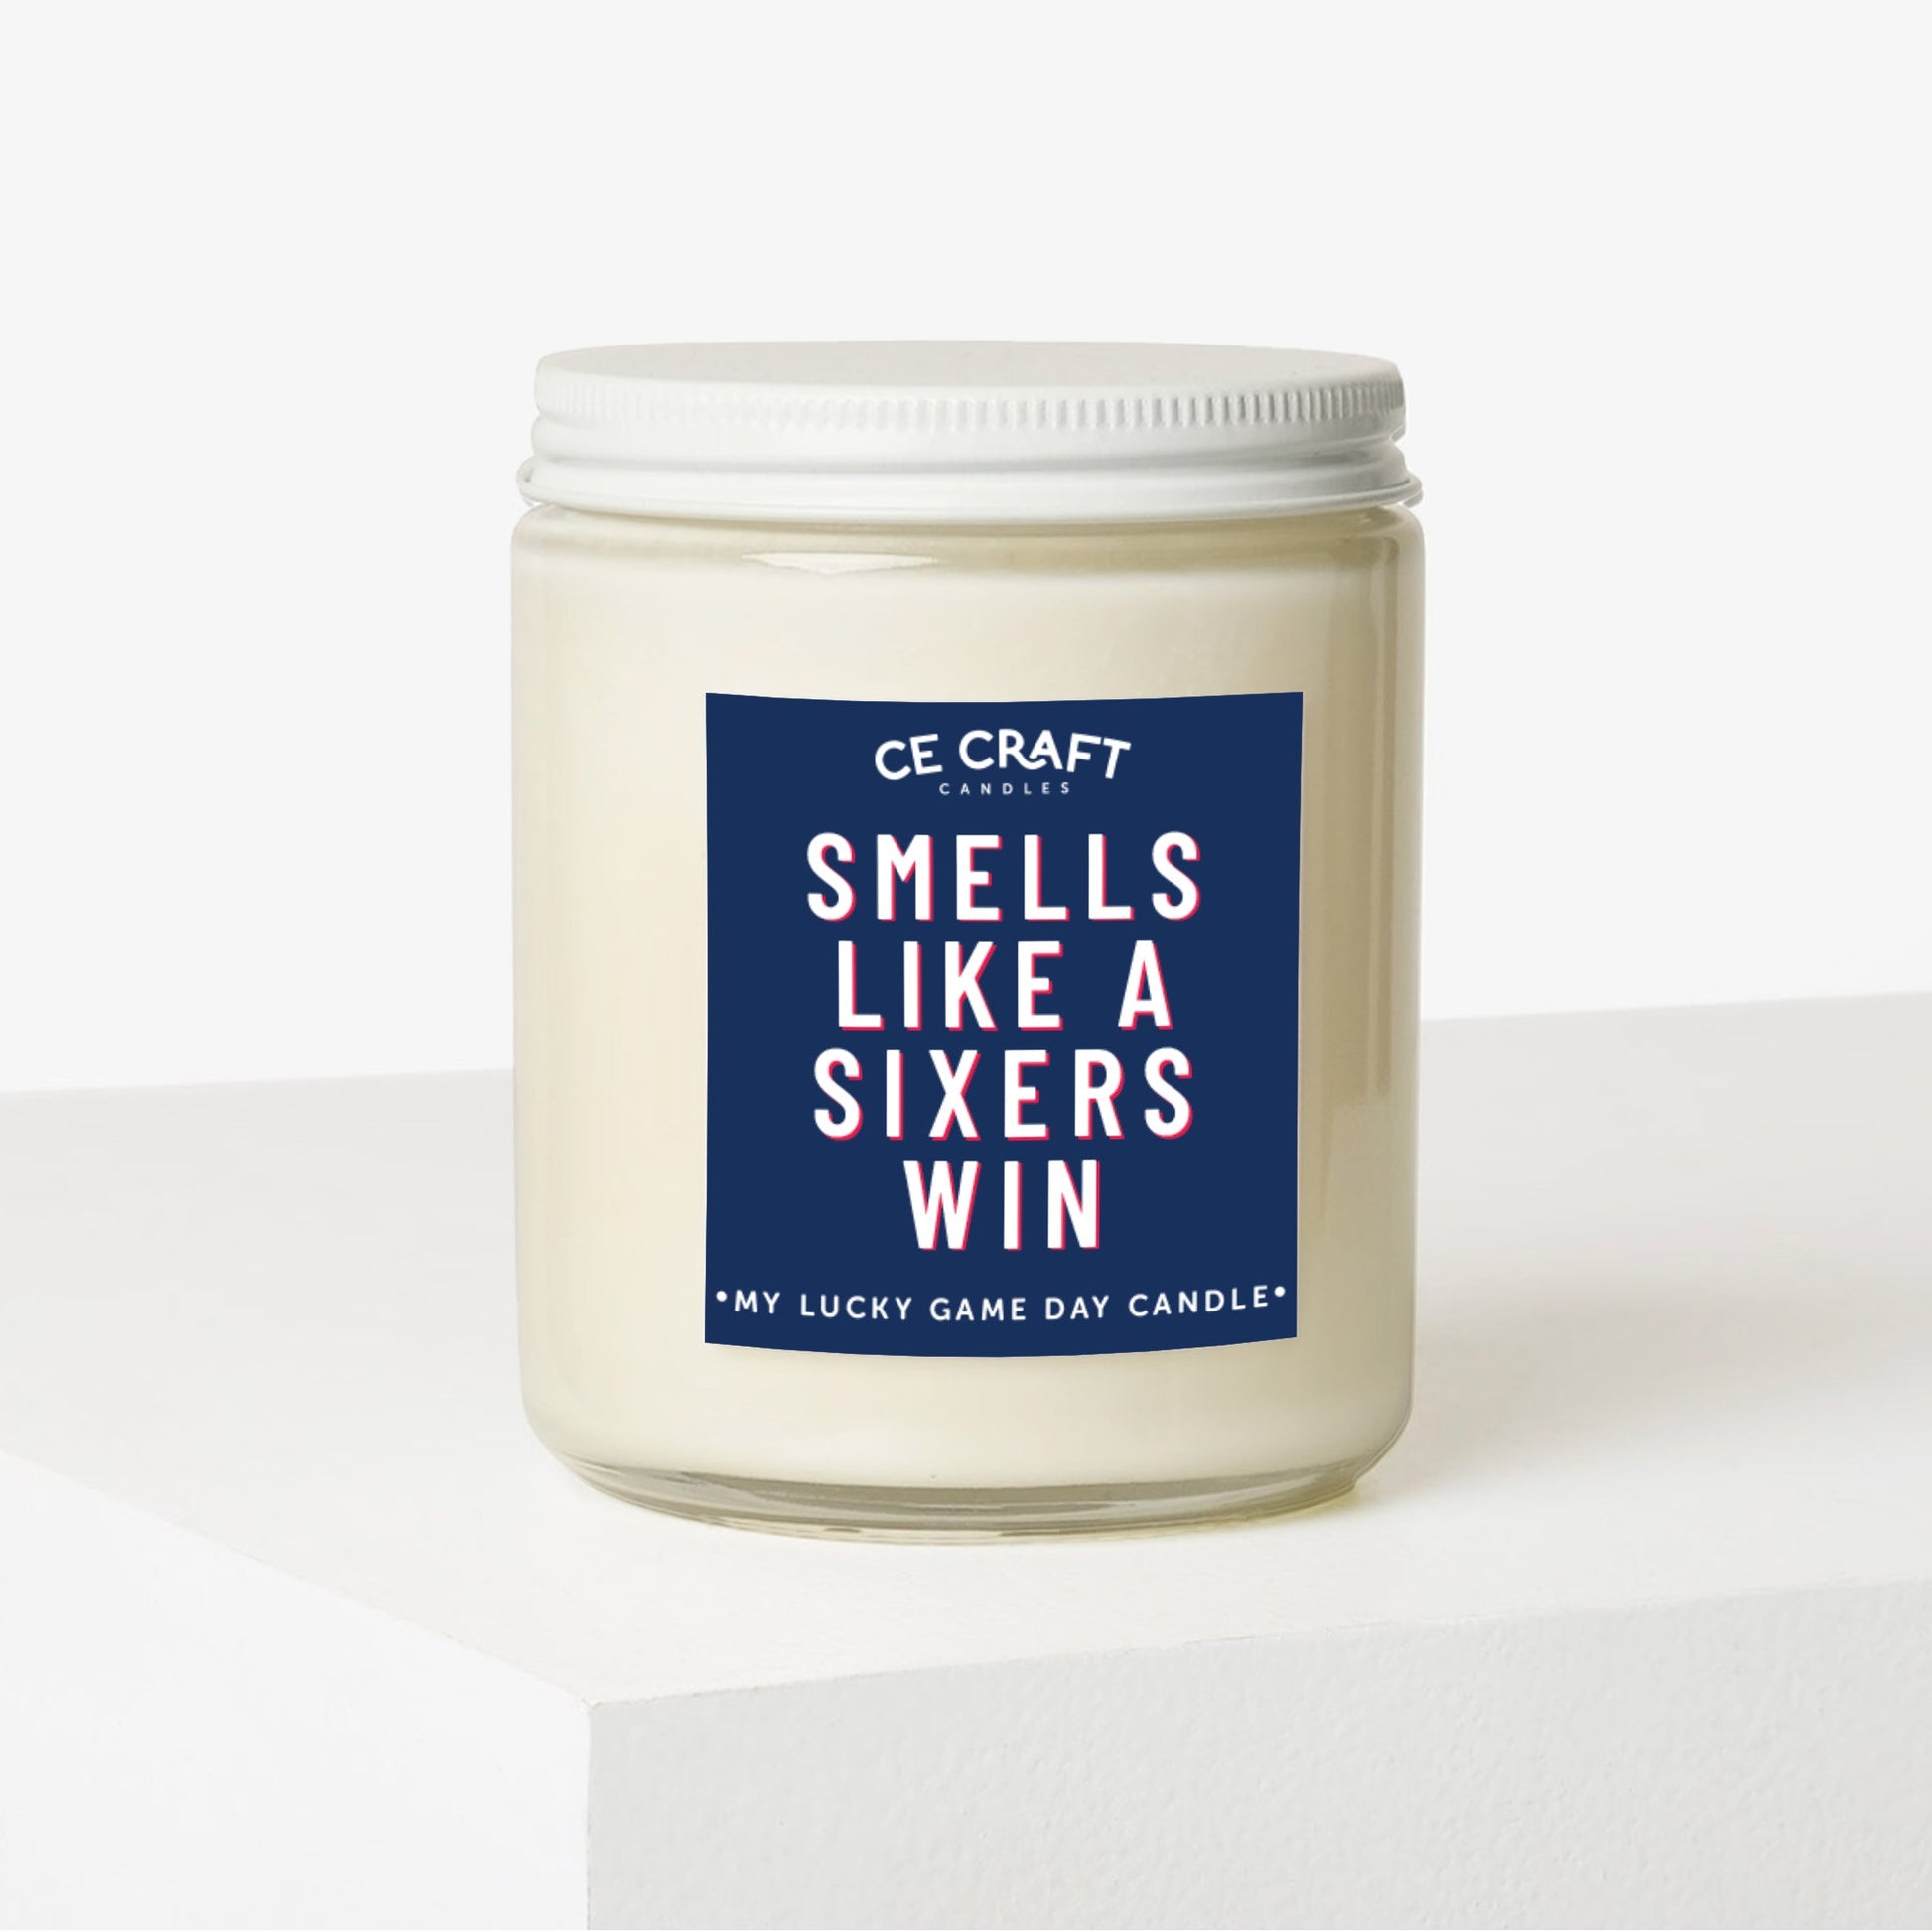 Smells Like a Sixers Win Scented Candle Candles CE Craft 